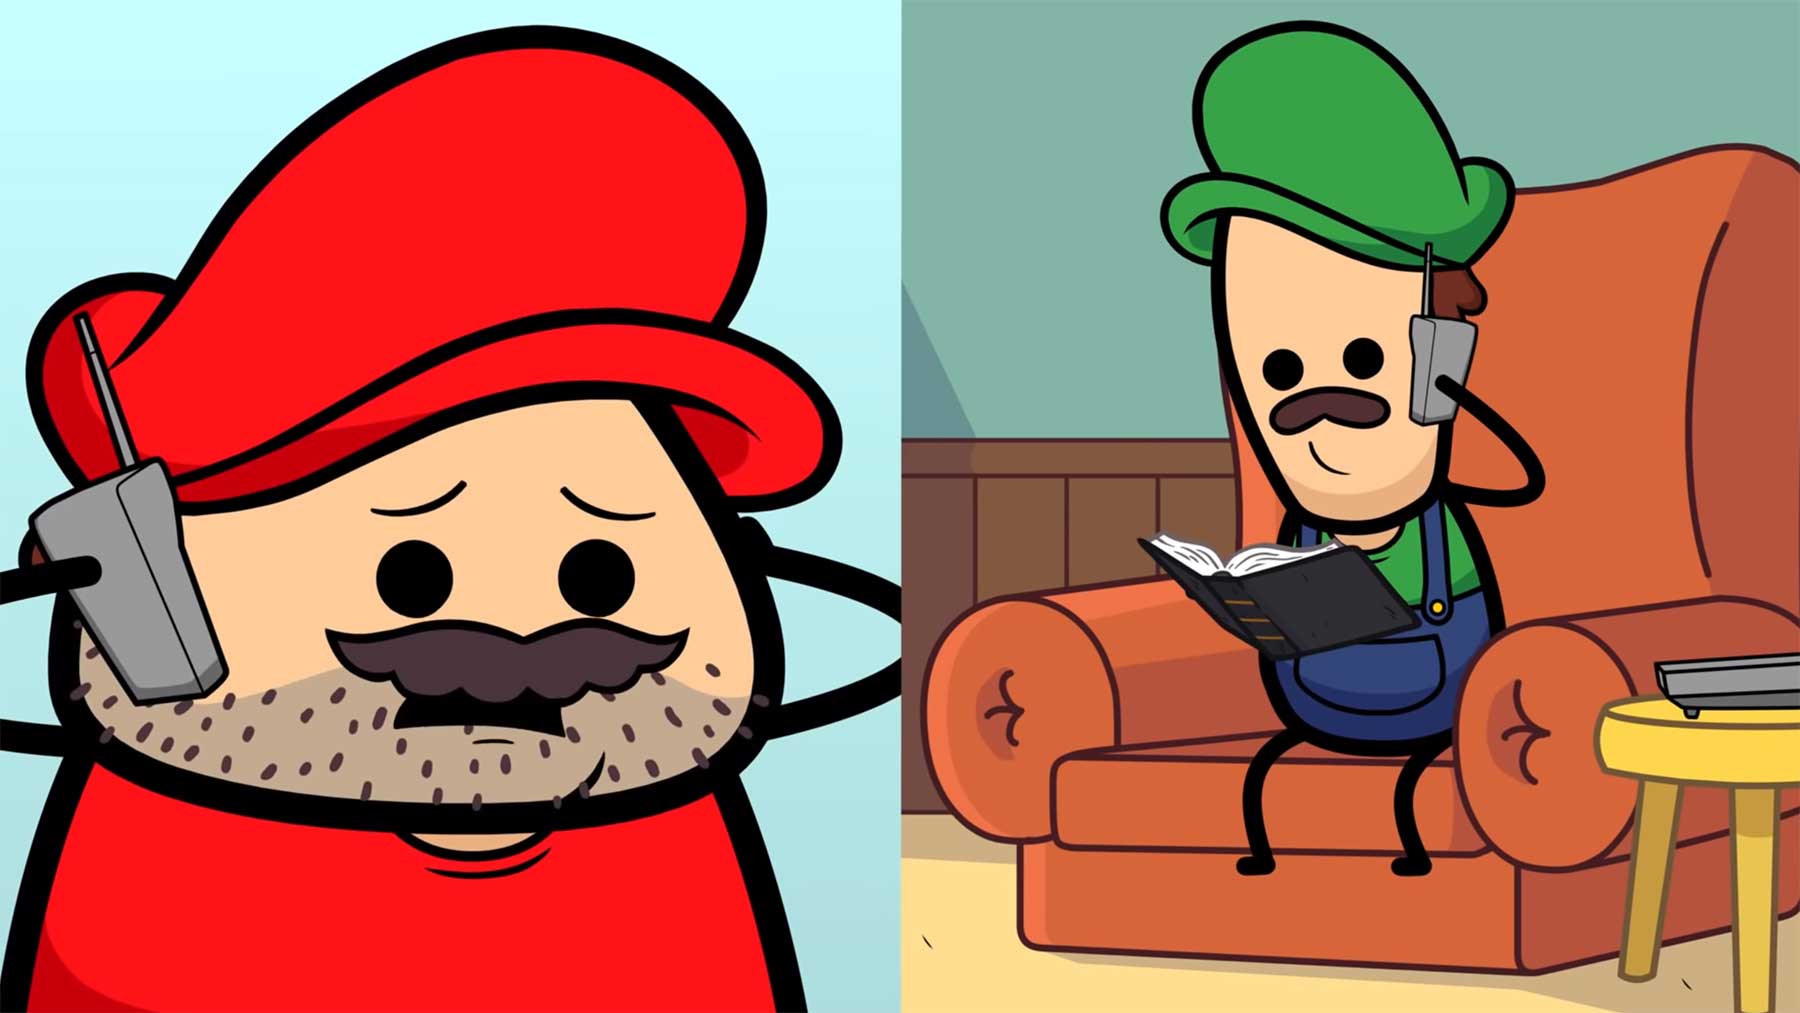 Cyanide & Happiness Shorts: "The Plumber Brothers" The-Plumber-Brothers-Cyanide-Happiness-Shorts 